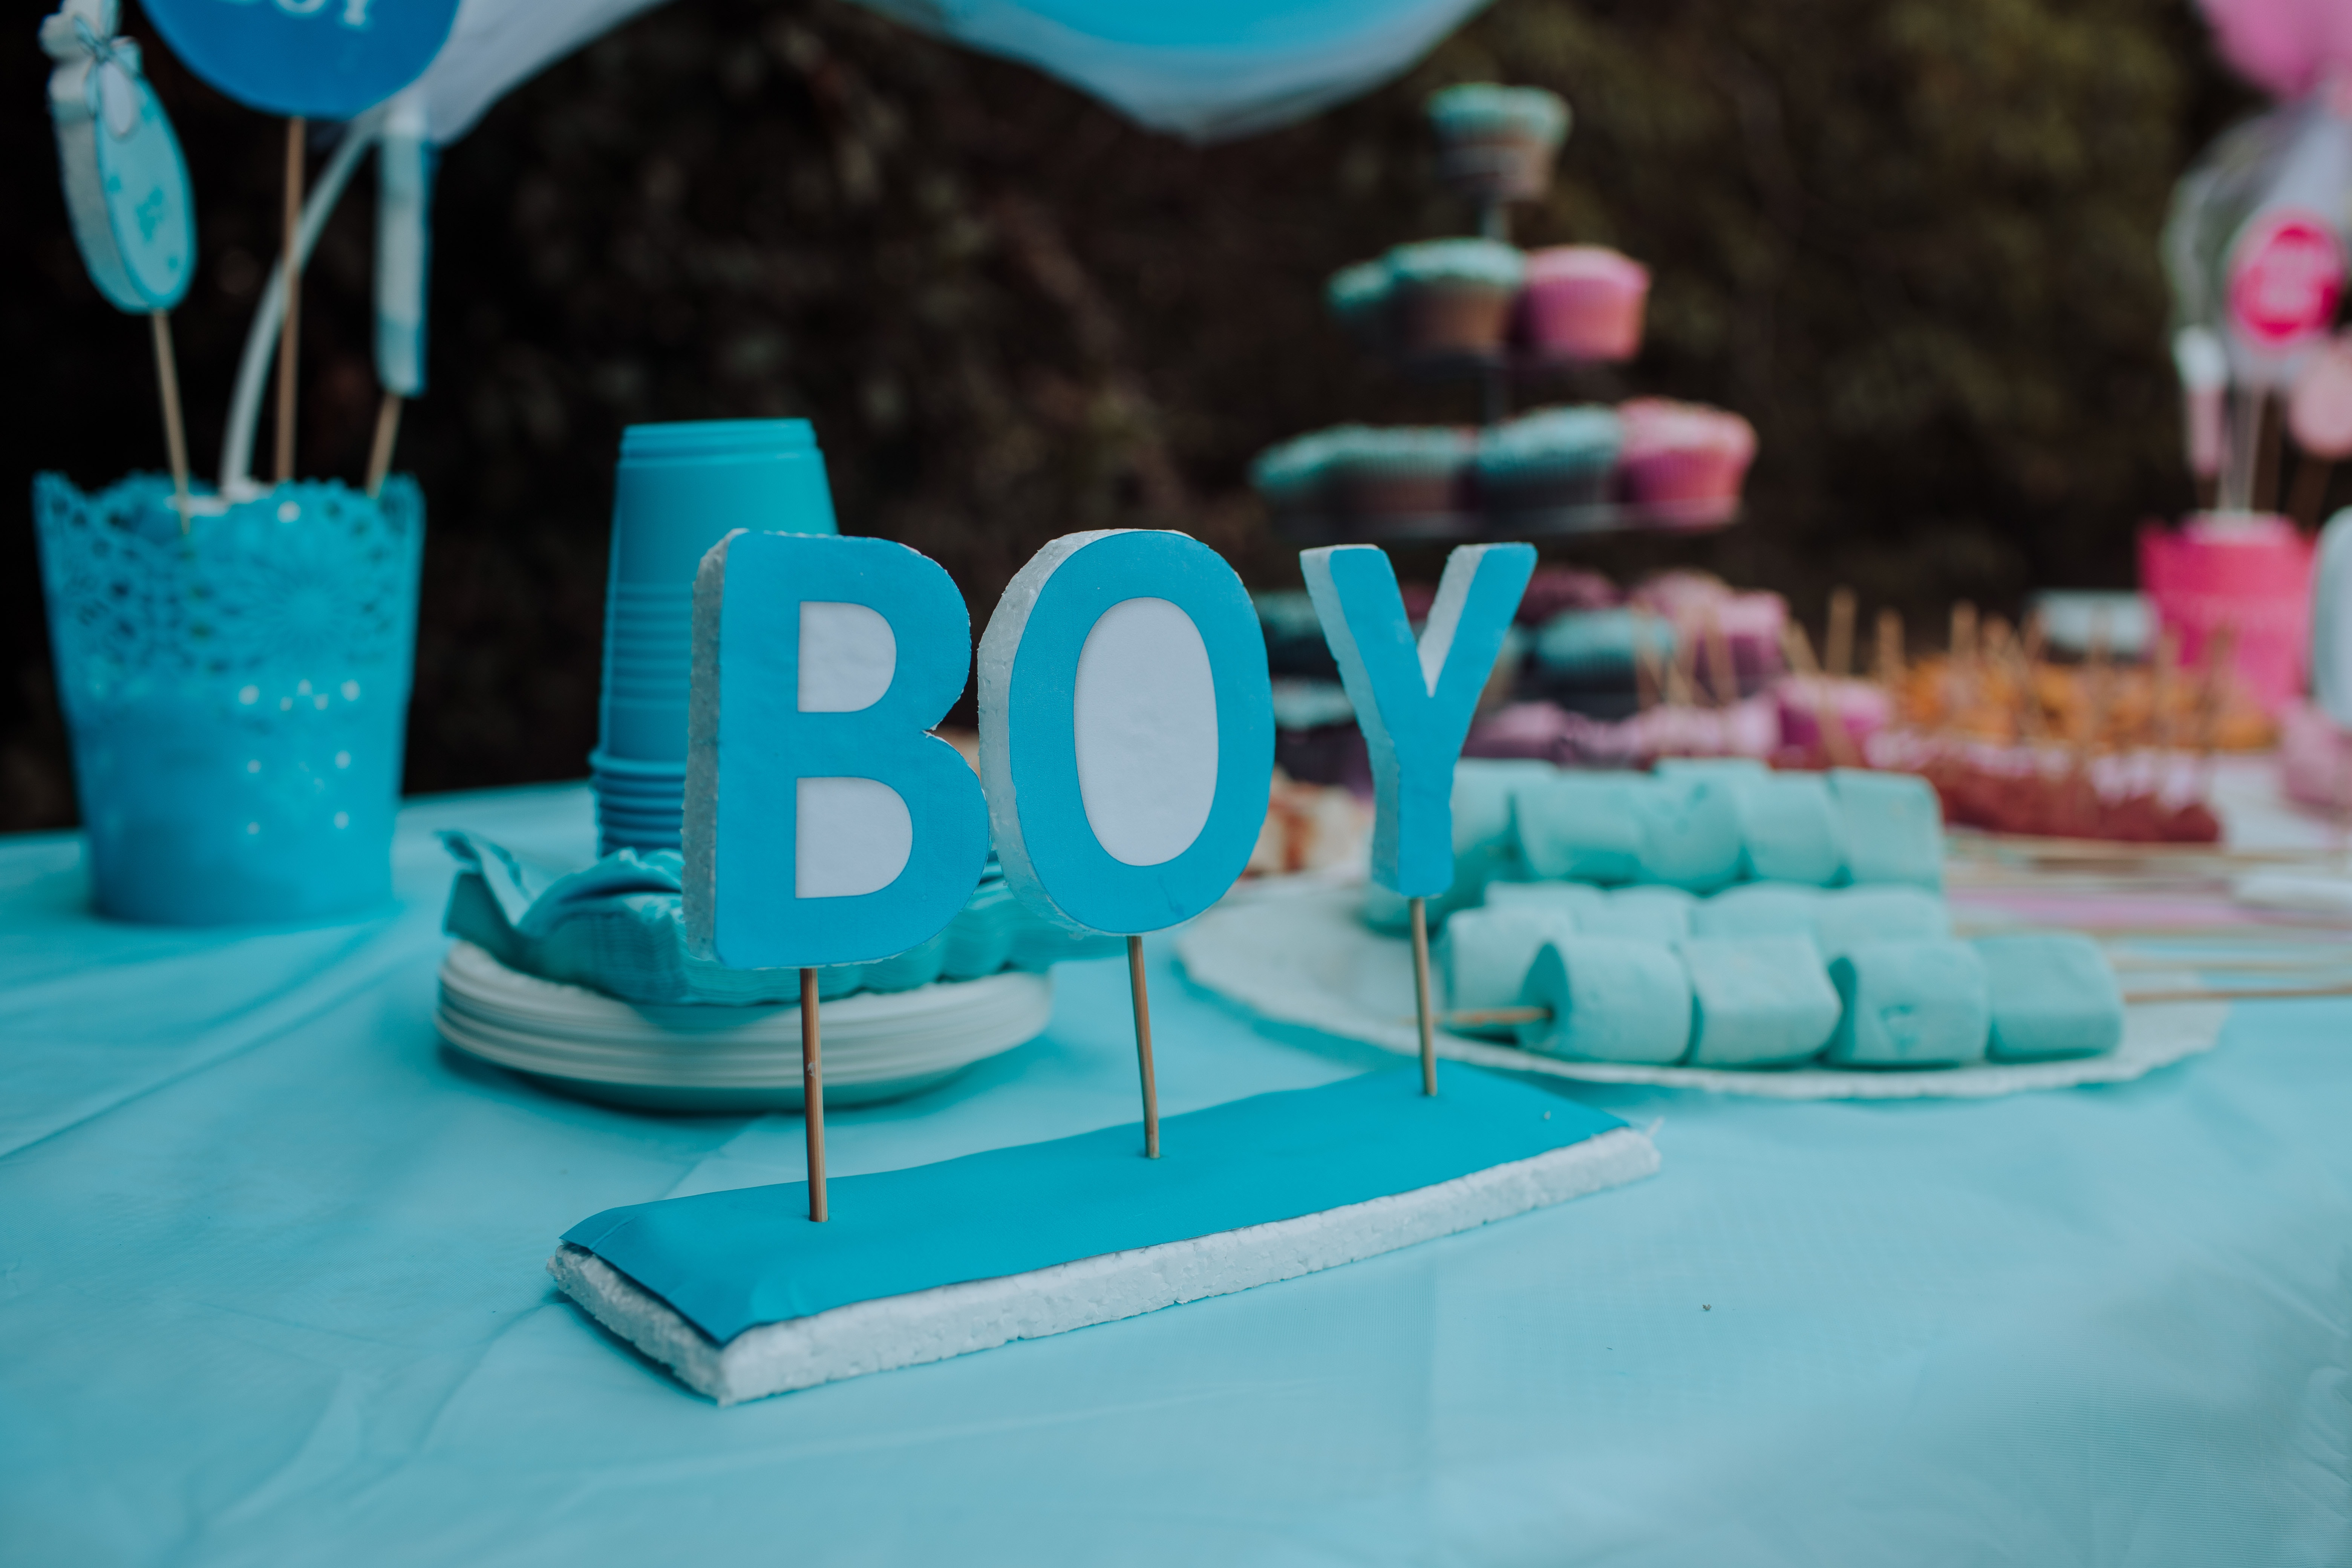 Table covered with blue decorations and treats with a sign saying "BOY."